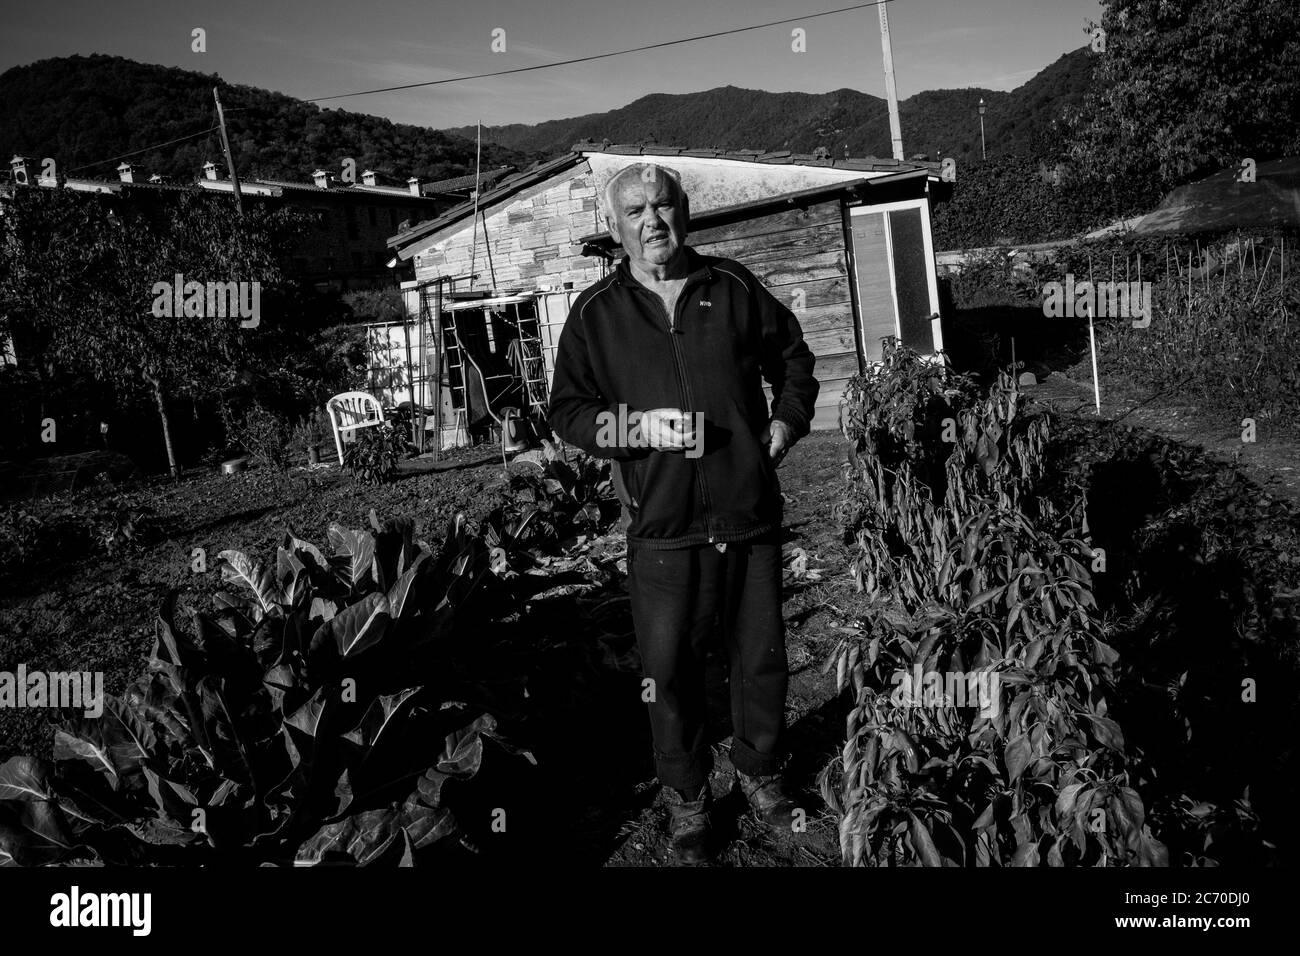 Jose Carrillo, 75, retired, portrayed in his vegetable patch in Riudaura, Spain (Catalonia). Date: 28/10/2017. Date: Xabier Mikel Laburu. Jose is one of the few villagers who feel Spanish. Originally from Campanillas (Malaga), he arrived in Riudaura when 6 following the exile of his father following the Spanish Civil War. At home he says that they never talk of politics or soccer at home since both of his sons are independentists, but other then that, he has been living with his political ideas with no problems in the village. Stock Photo